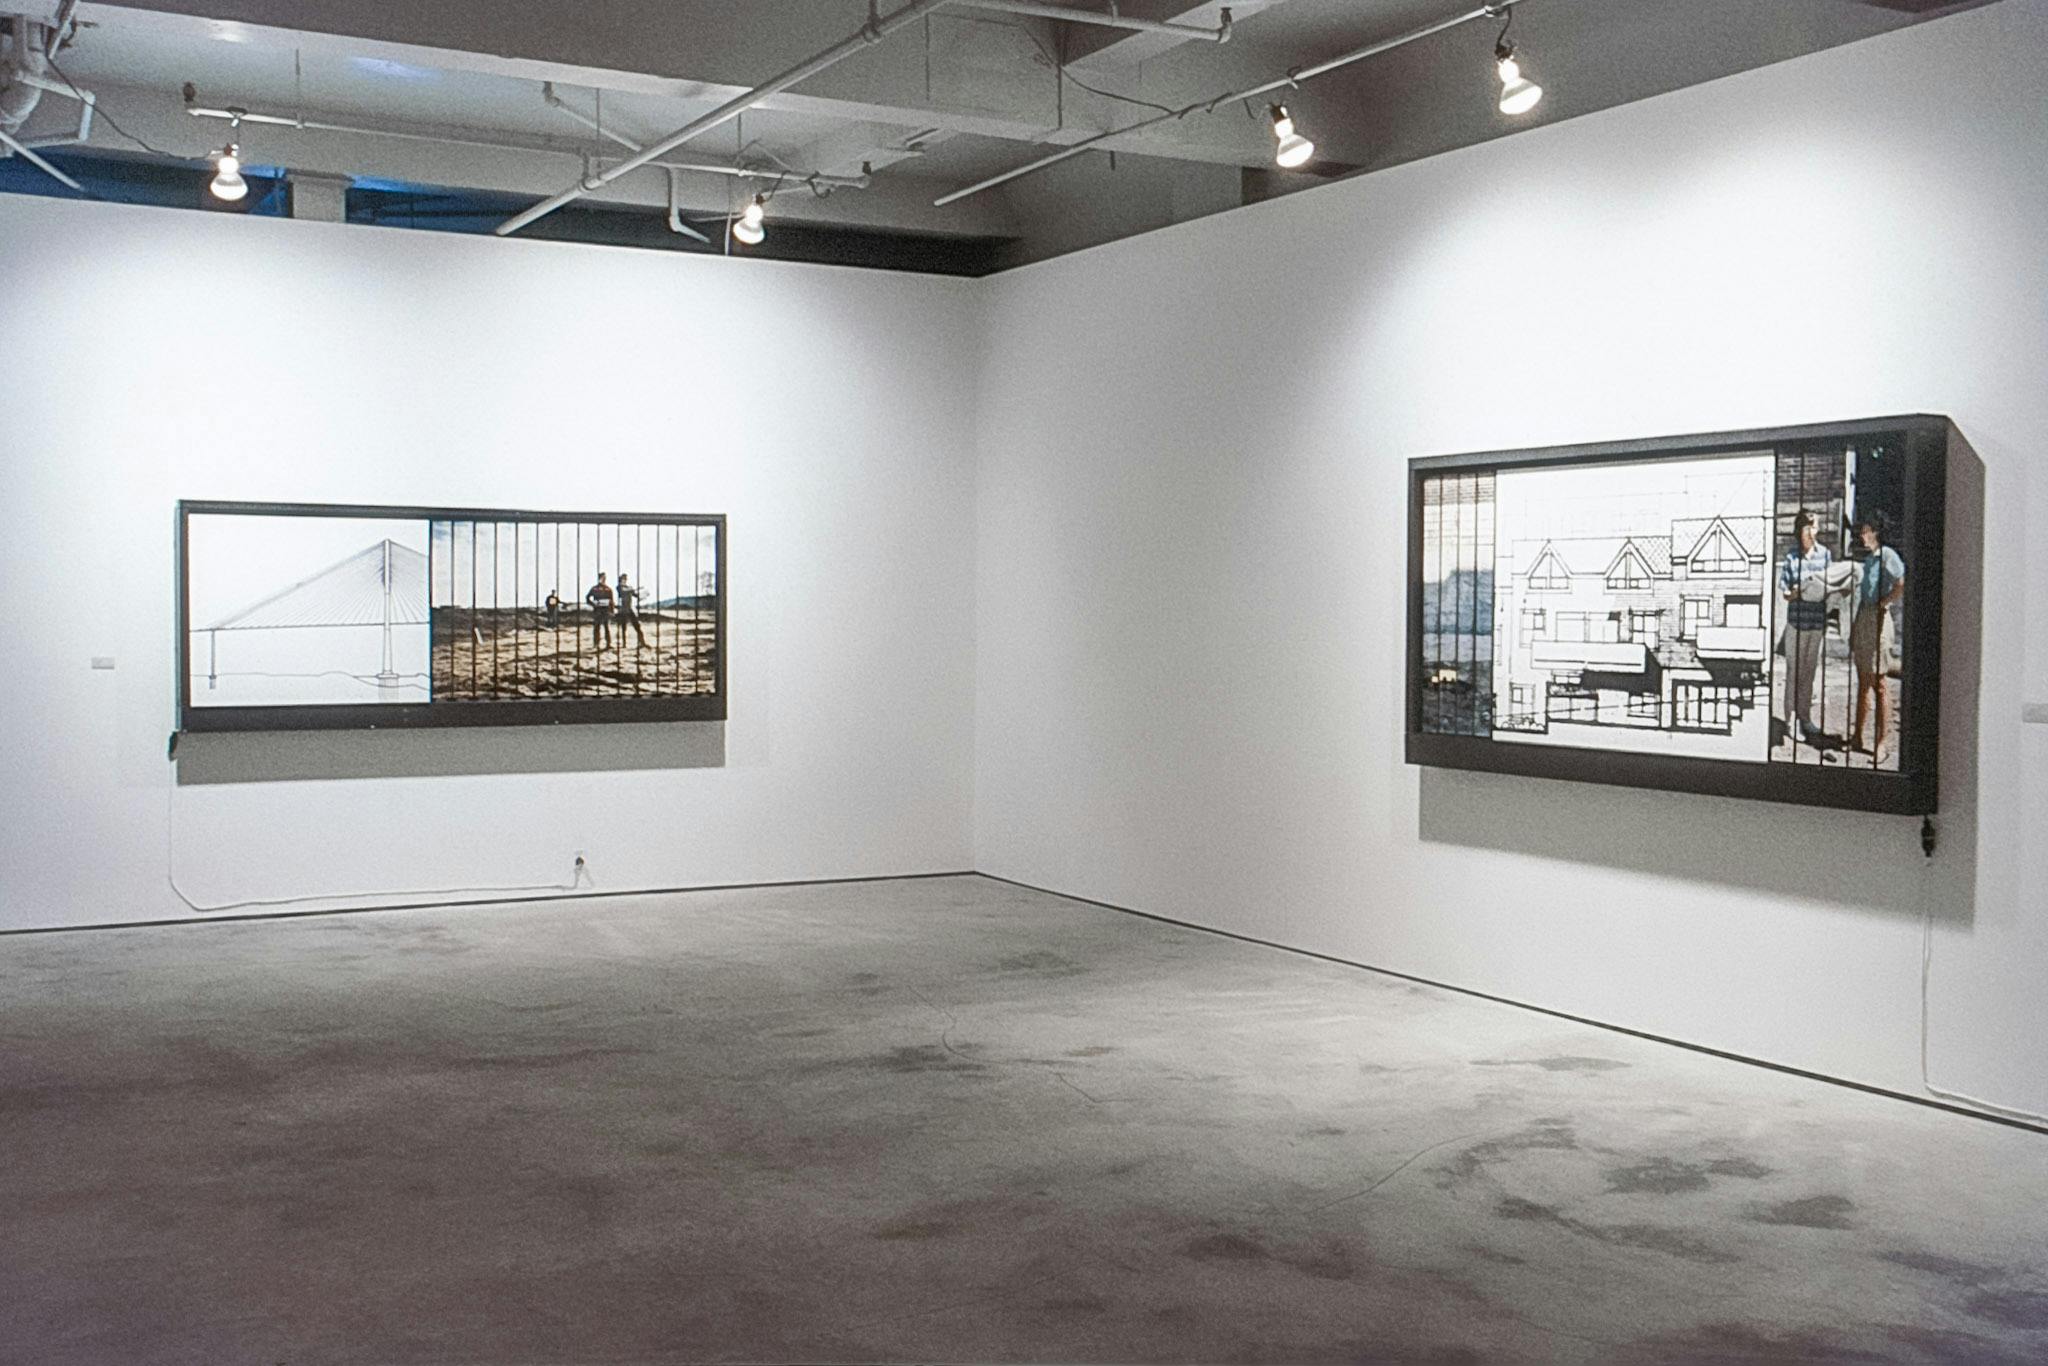 Two artworks on the walls of a gallery. One shows a drawing of a bridge, and a fragmented image of people in a field. One has an exterior drawing of houses, and two fragmented photos of a city scene.